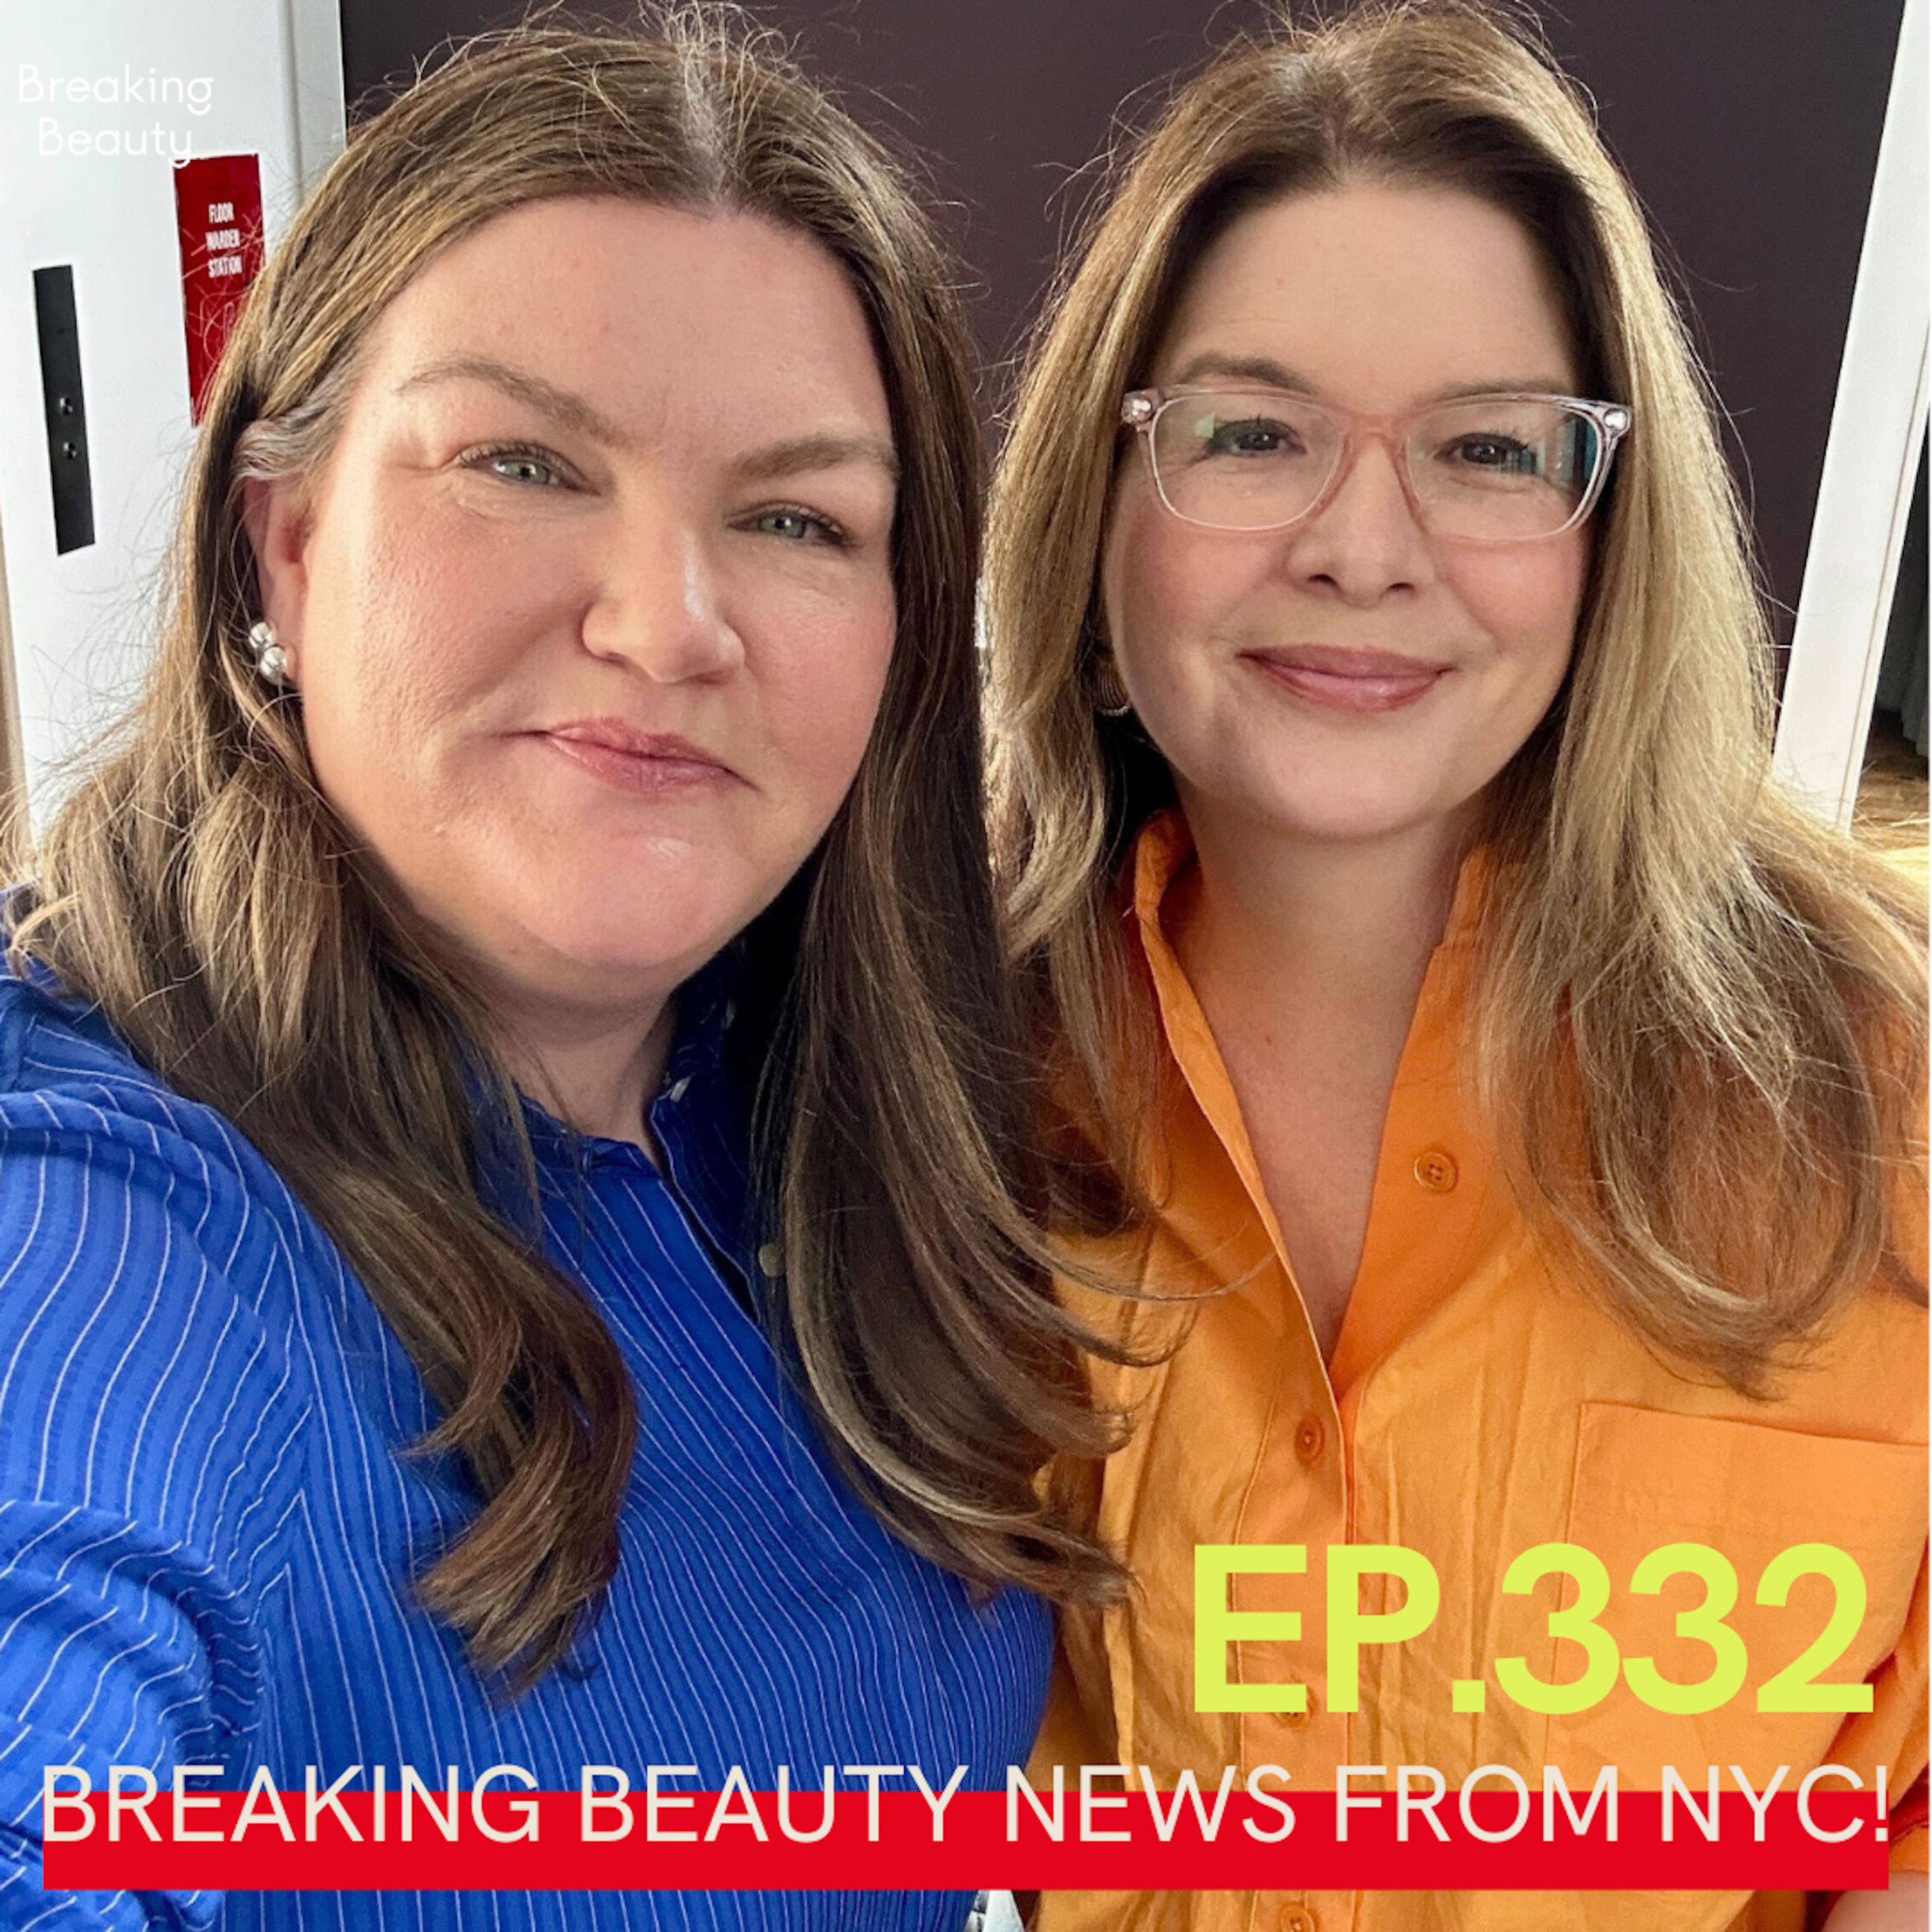 What You Need to Know About Dyson’s New, “Nural” Hair Dryer, The Next Gen of Beauty Ambassadors, Beyoncé’s Vlog Reveal – Plus, Carlene Makes a Surprise Announcement!